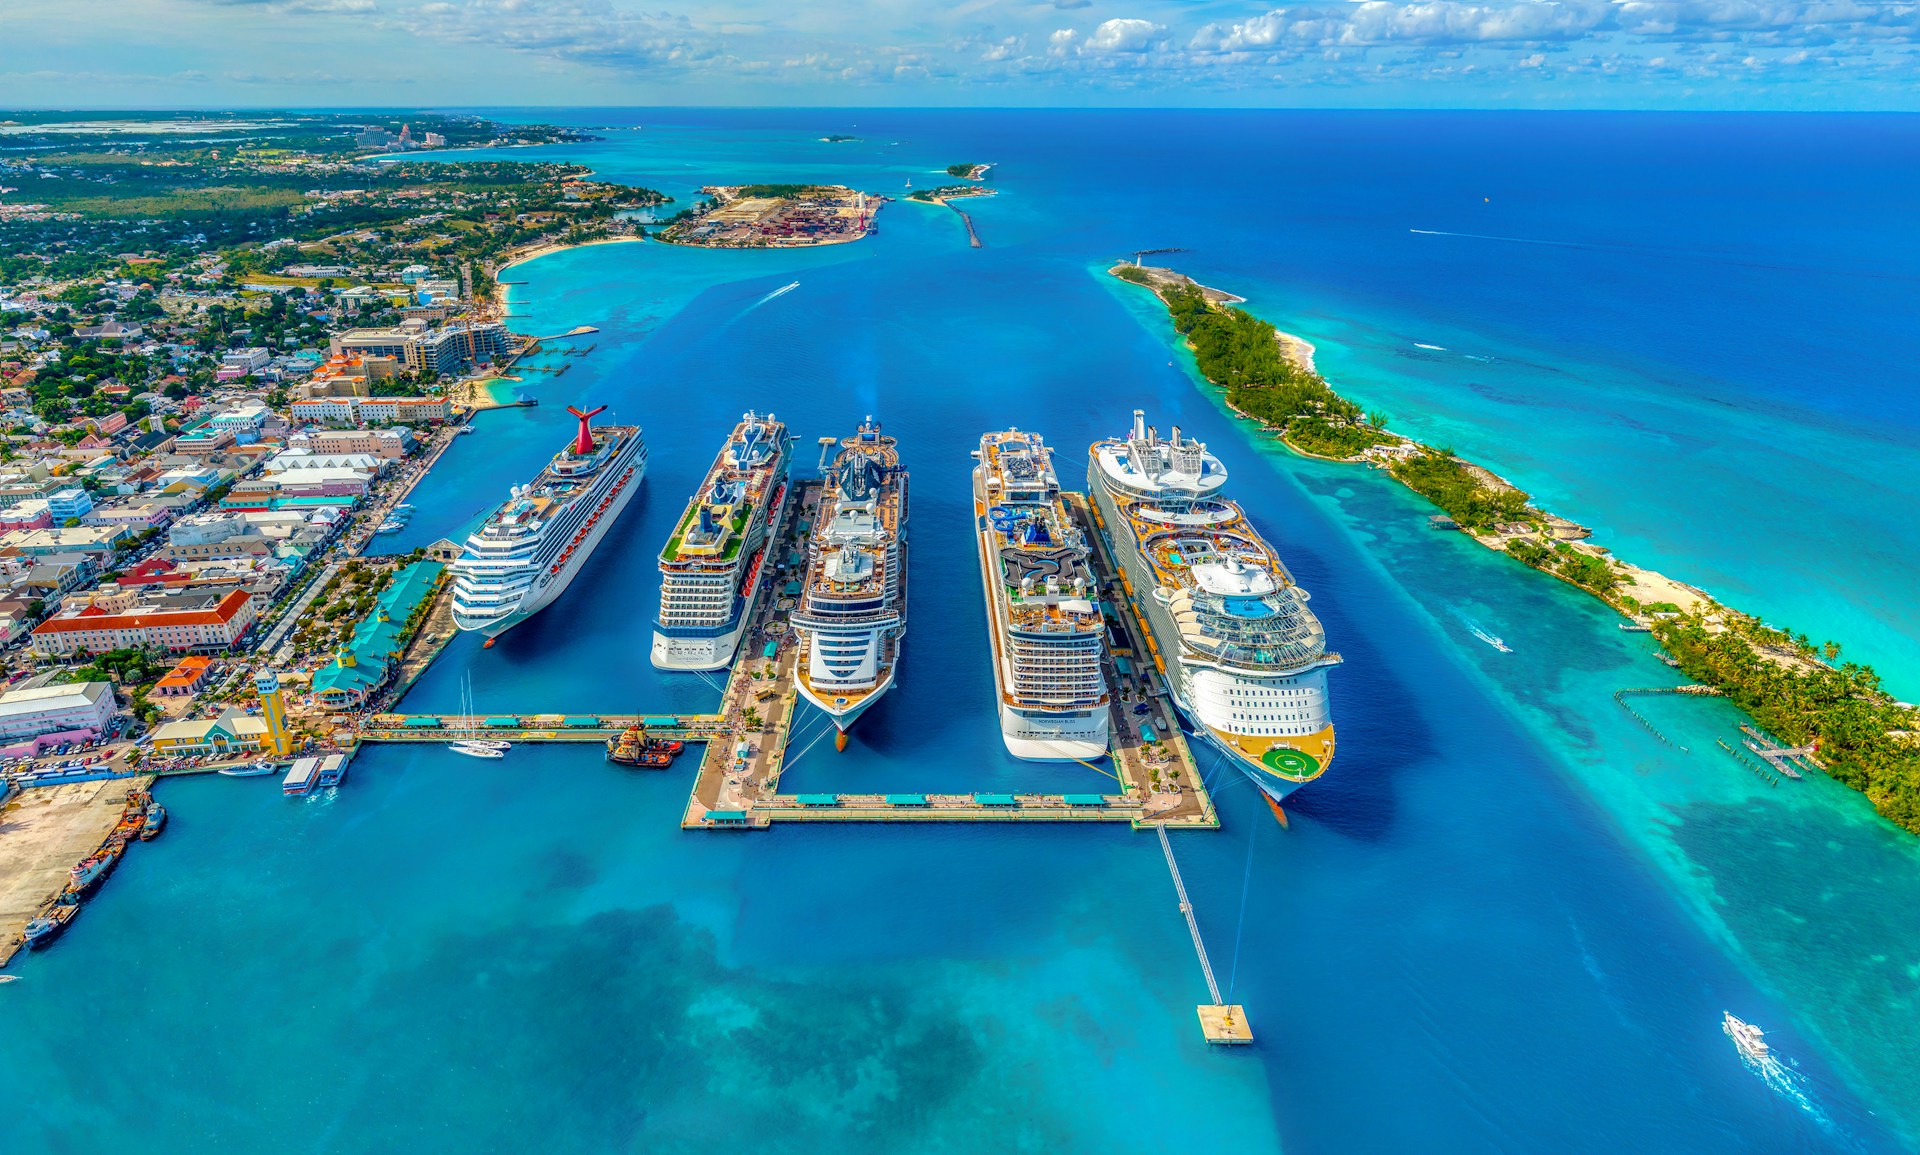 2023 Saw Record Passenger Numbers, Reports Cruise Industry